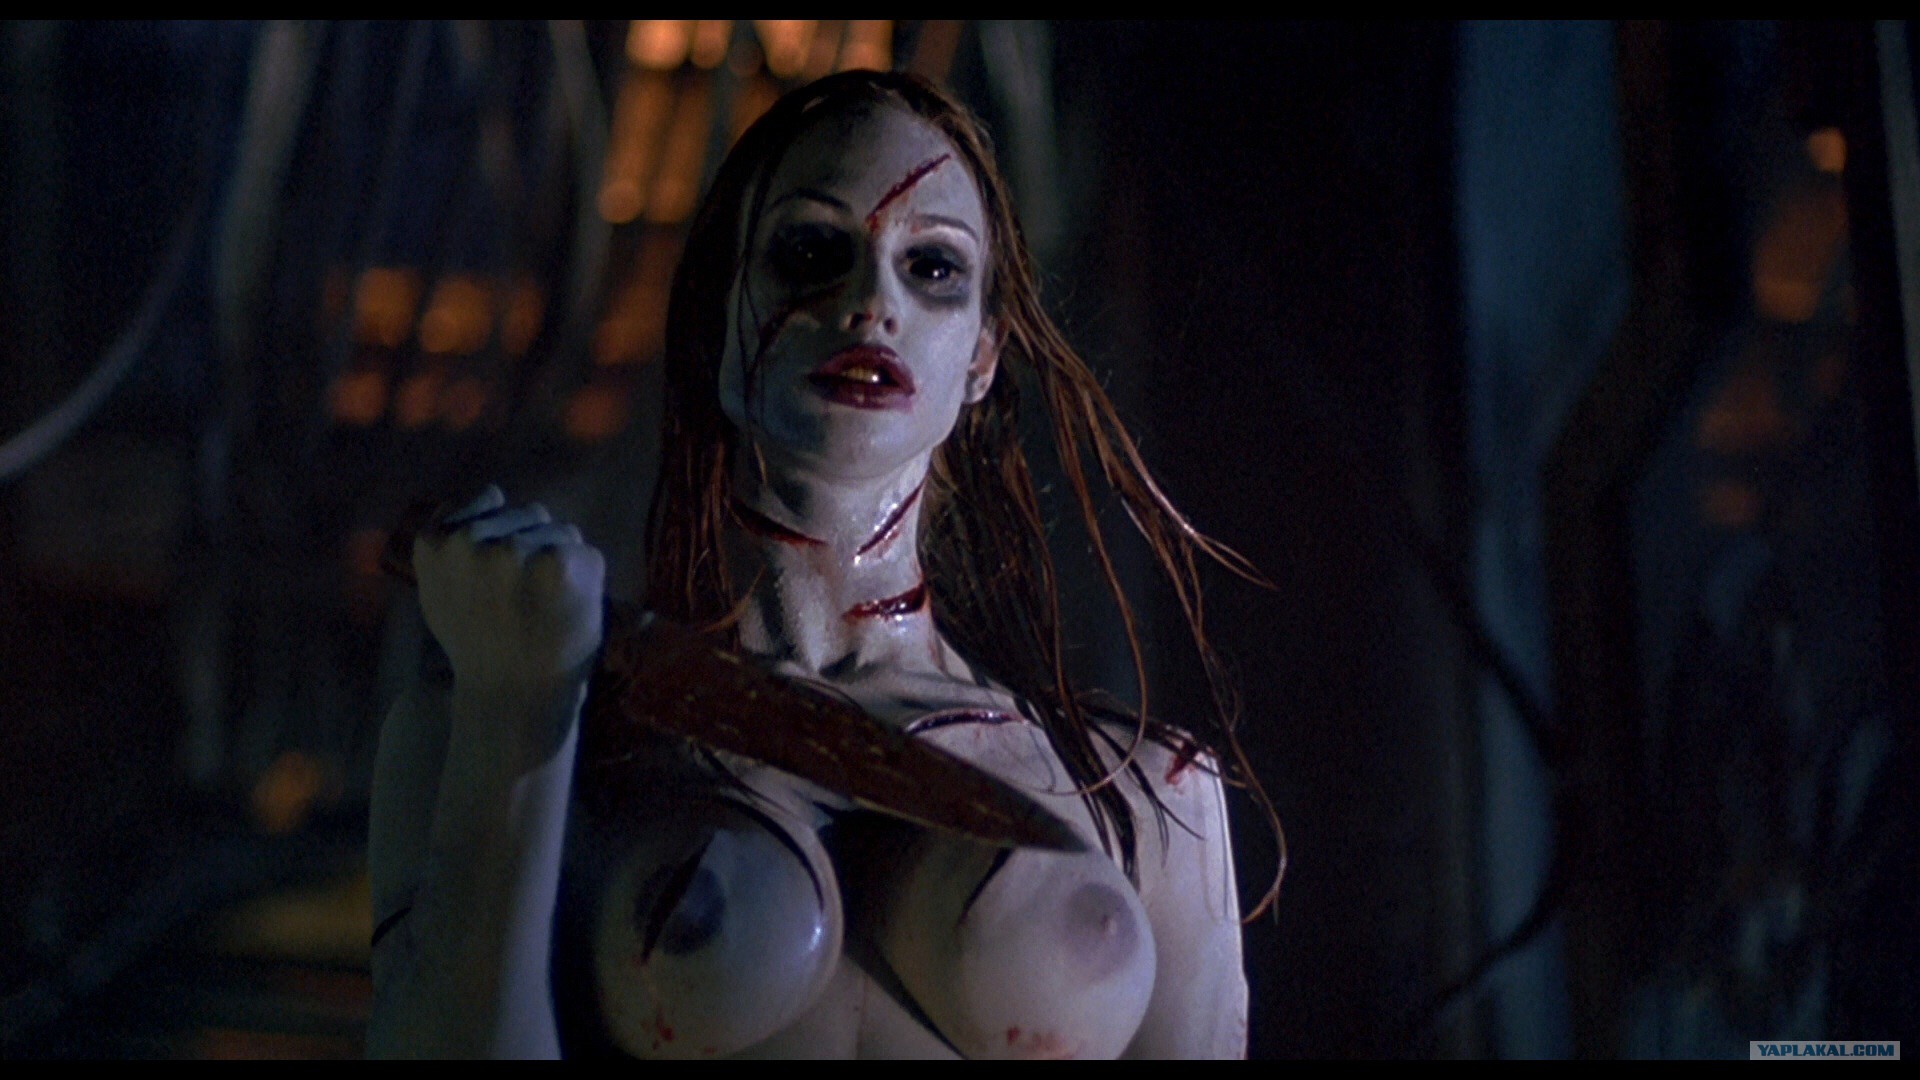 Women naked in horror movies.